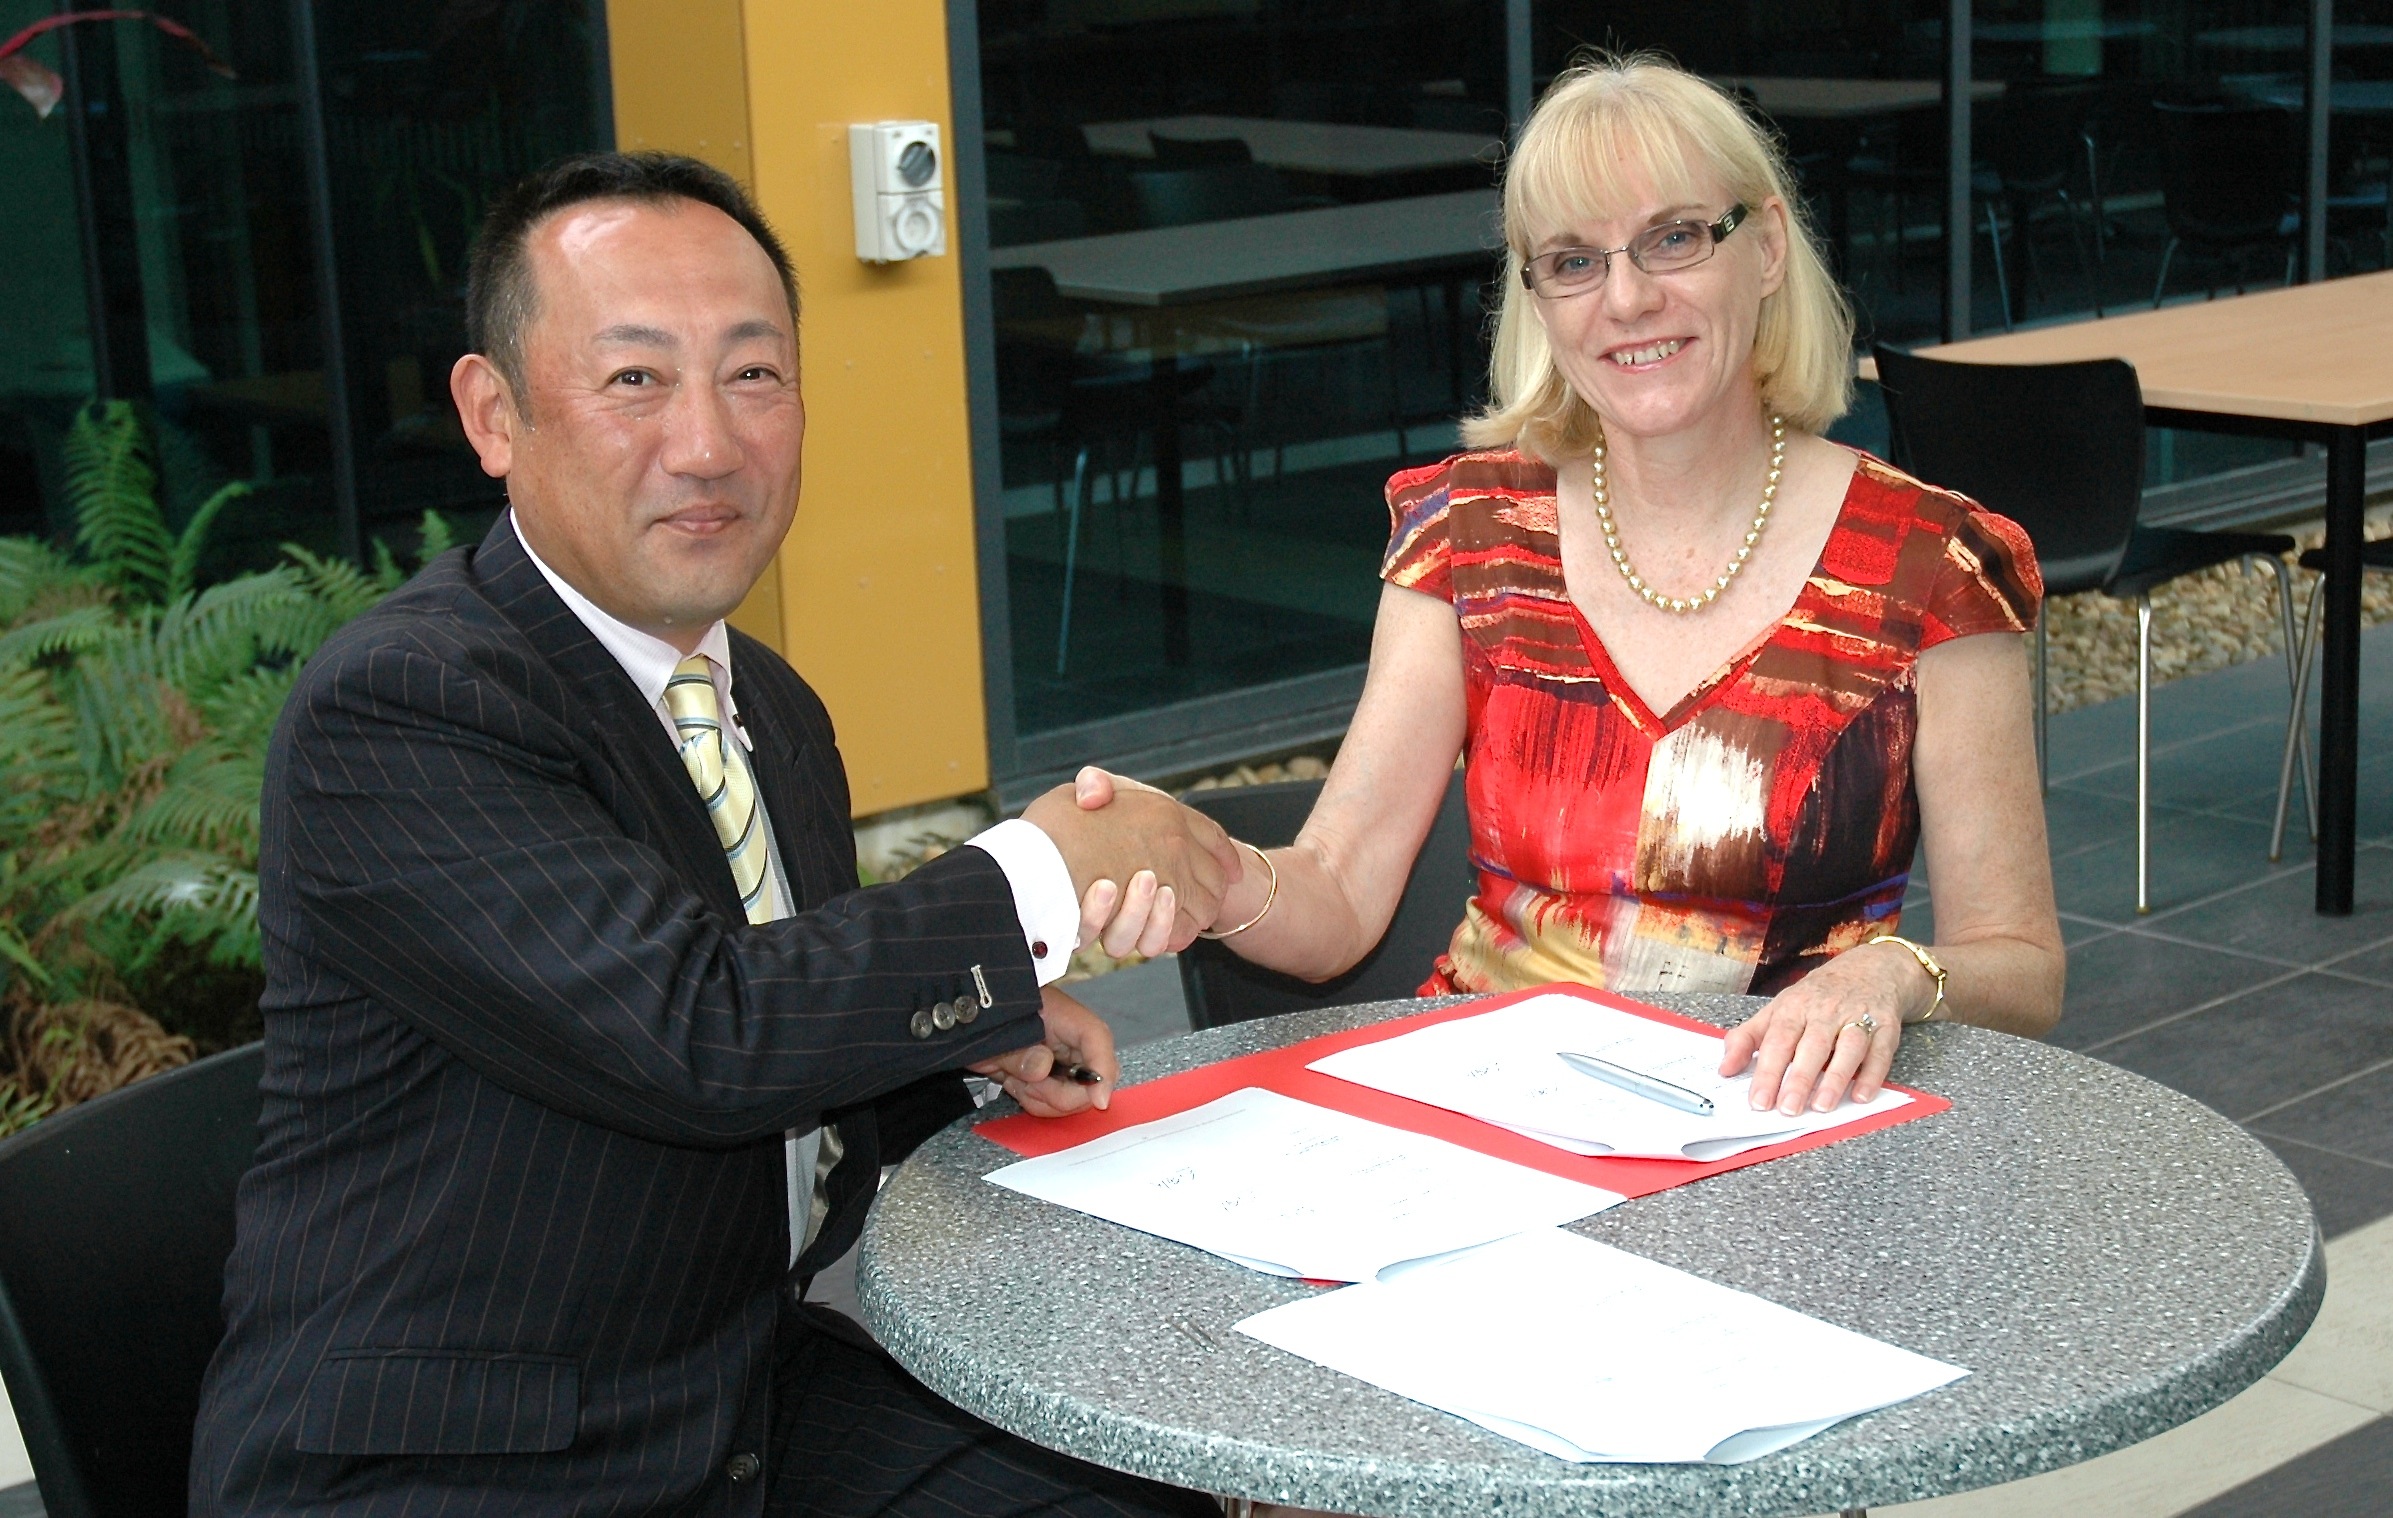 Pro Vice Chancellor of Griffith Sciences, Professor Debra Henly took part in a signing ceremony with Septem Soken Representative Director, Mr Yousuke Yamashita, at the Eskitis Institute.